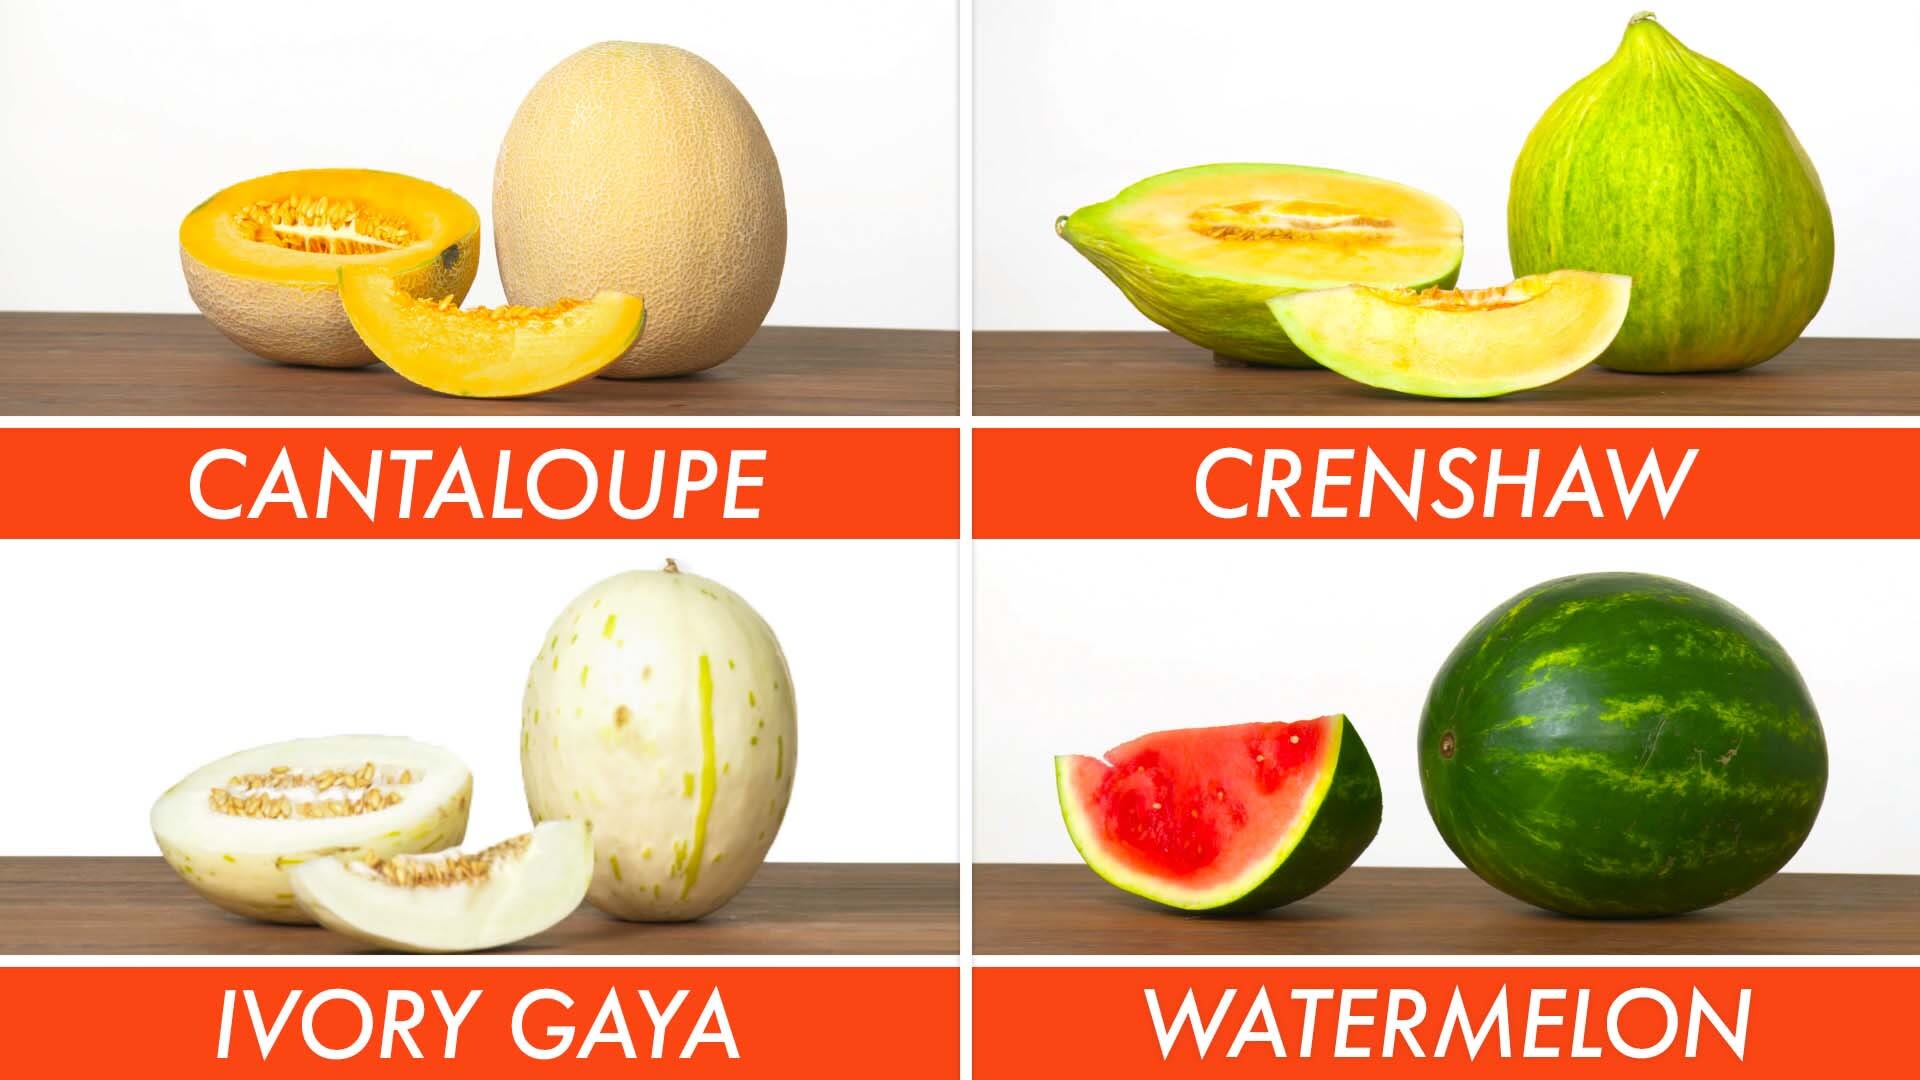 What Makes Honeydew Different From Cantaloupe?